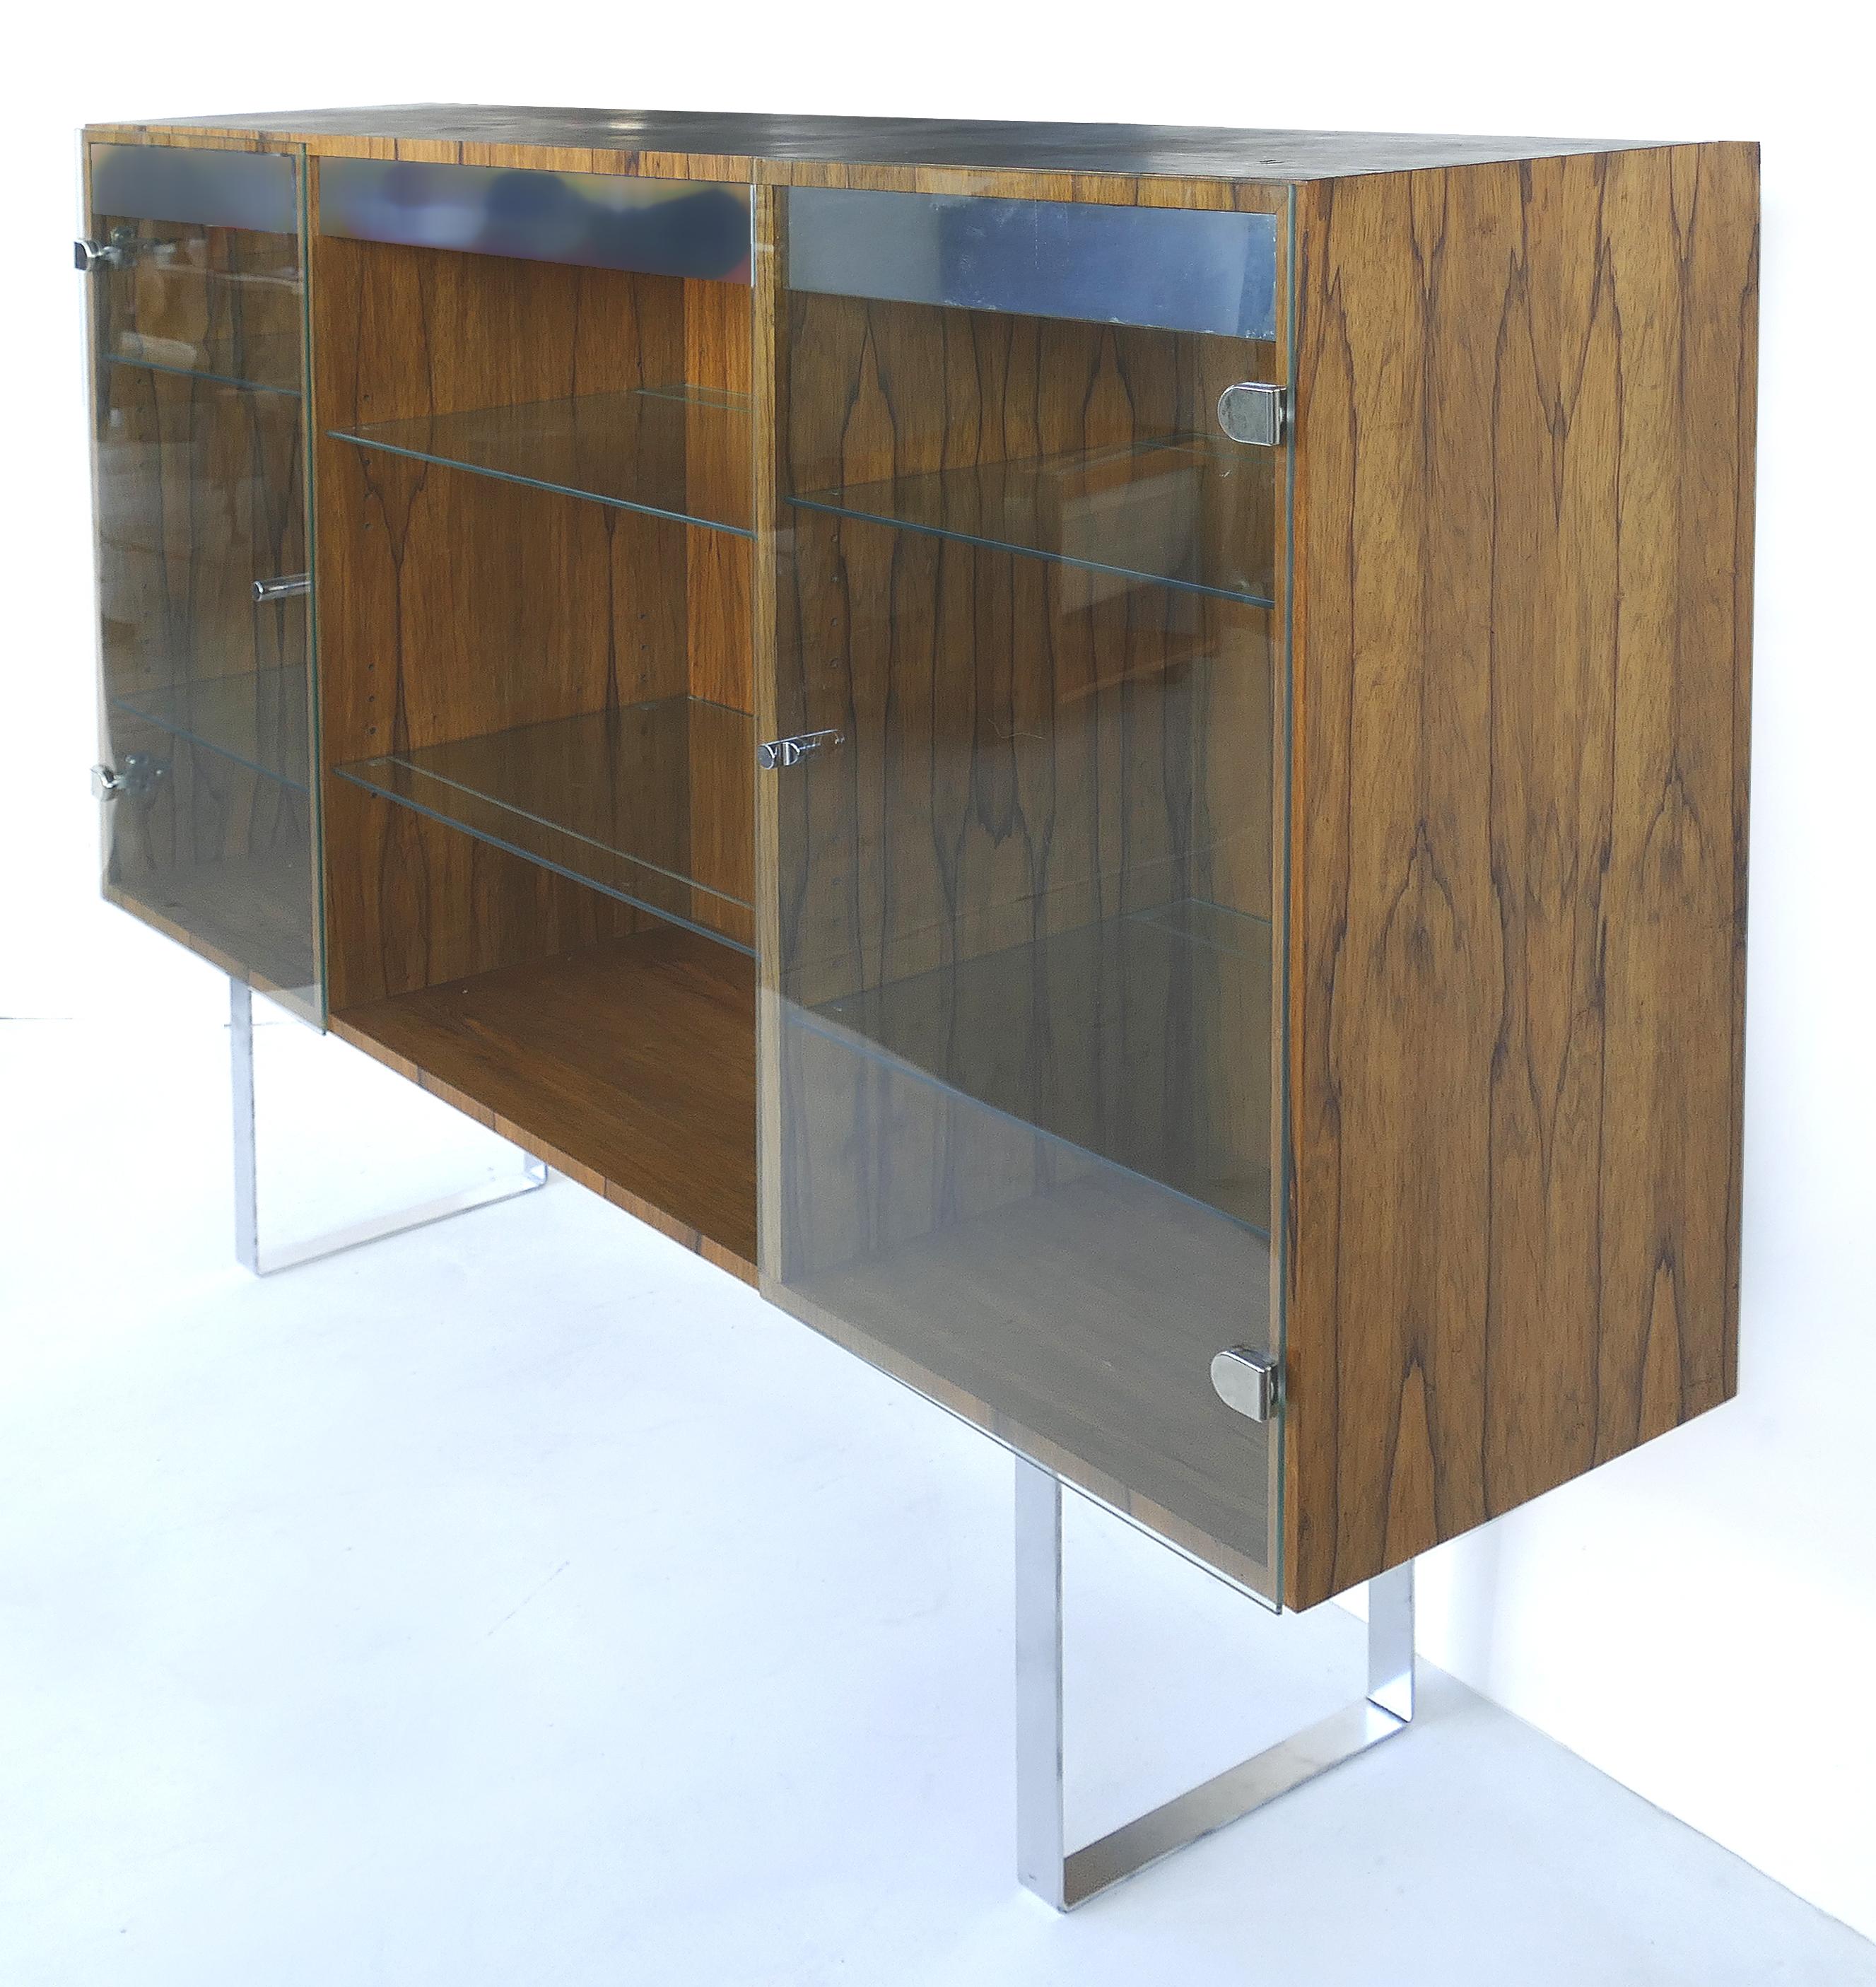 Milo Baughman Thayer Coggin rosewood Vitrine with glass doors and adjustable shelves

Offered for sale is a Milo Baughman rosewood vitrine which is raised on stainless steel legs. The rosewood case has glass doors that open to reveal adjustable